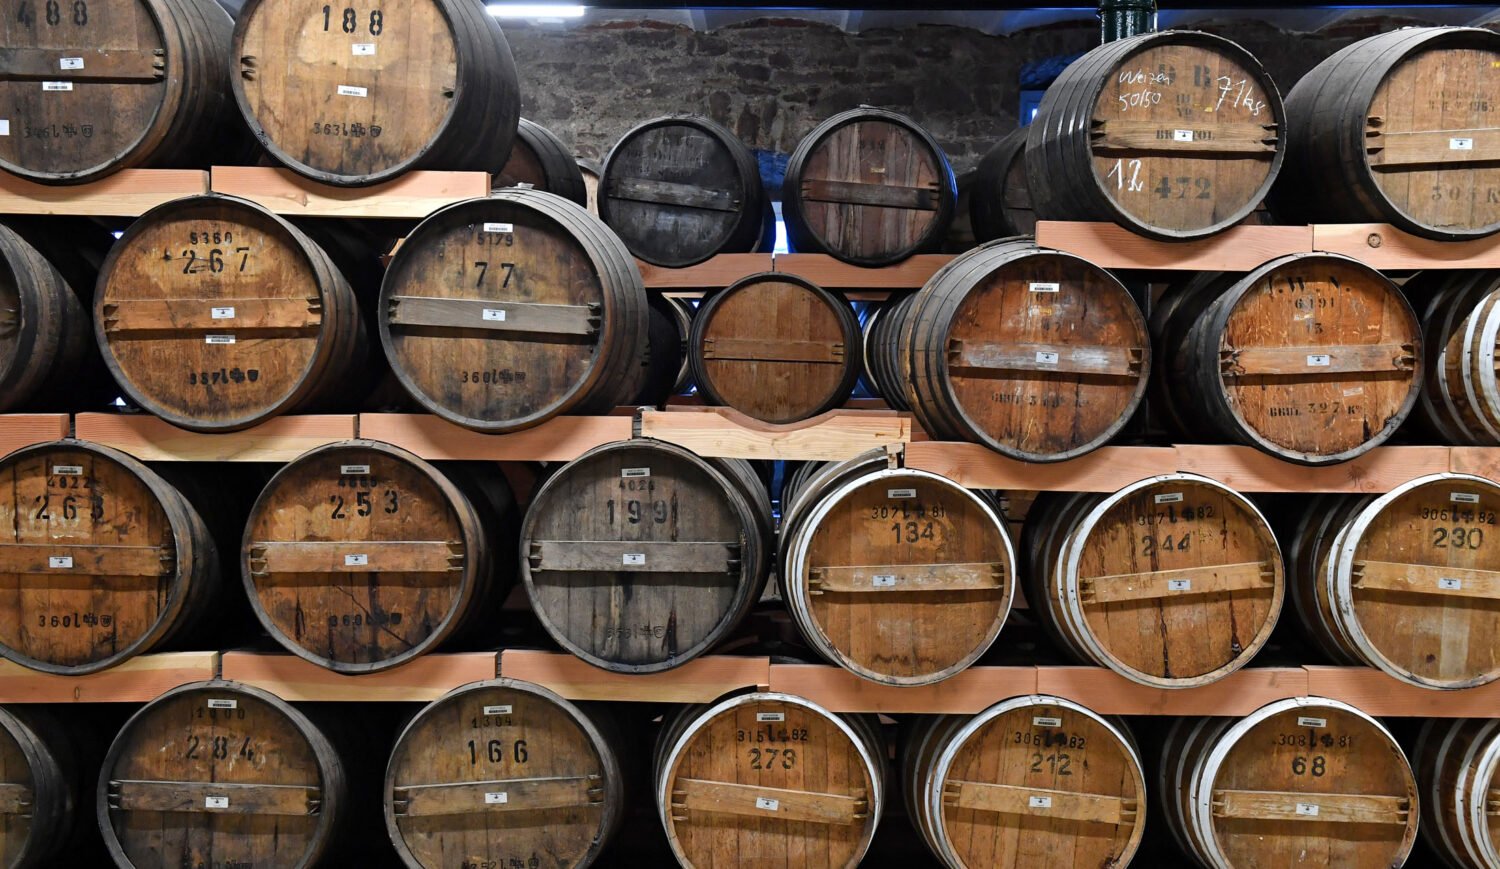 In the distillery's cellars, the whiskey is stored in old bourbon and brandy barrels © Göttingen Tourism and Marketing / Mischke